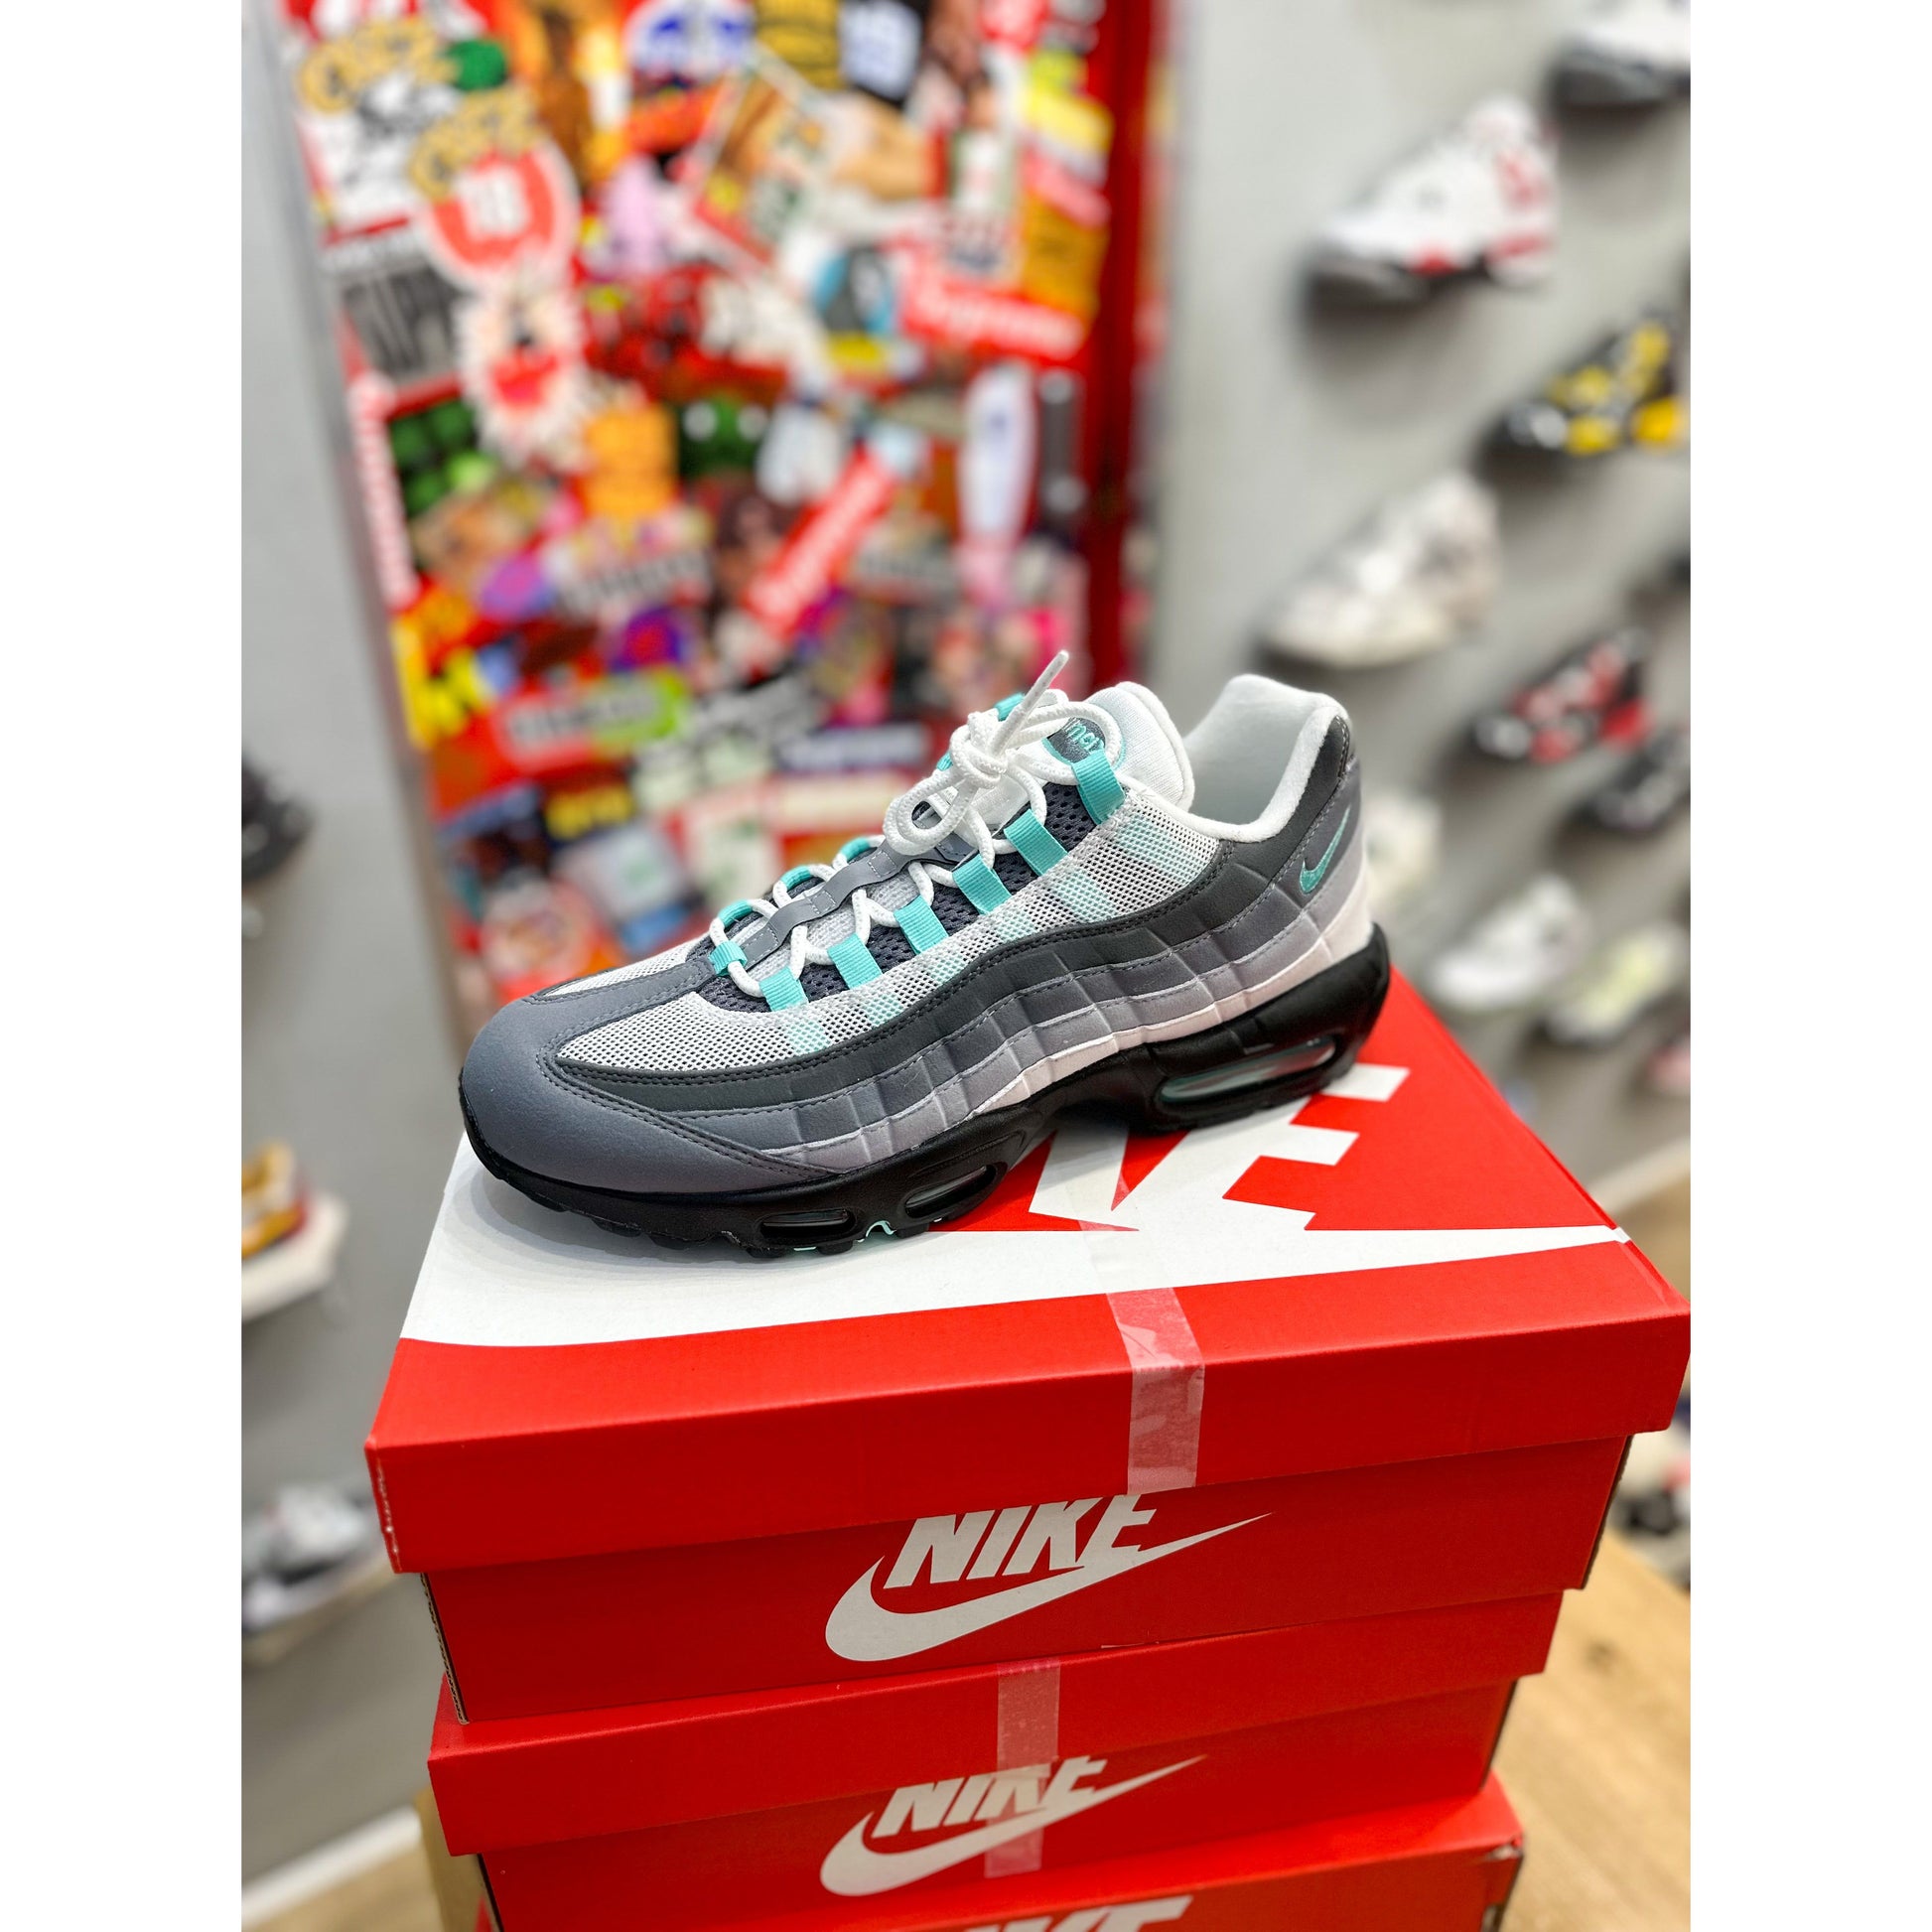 Nike Air Max 95 Hyper Turquoise FV4710-100